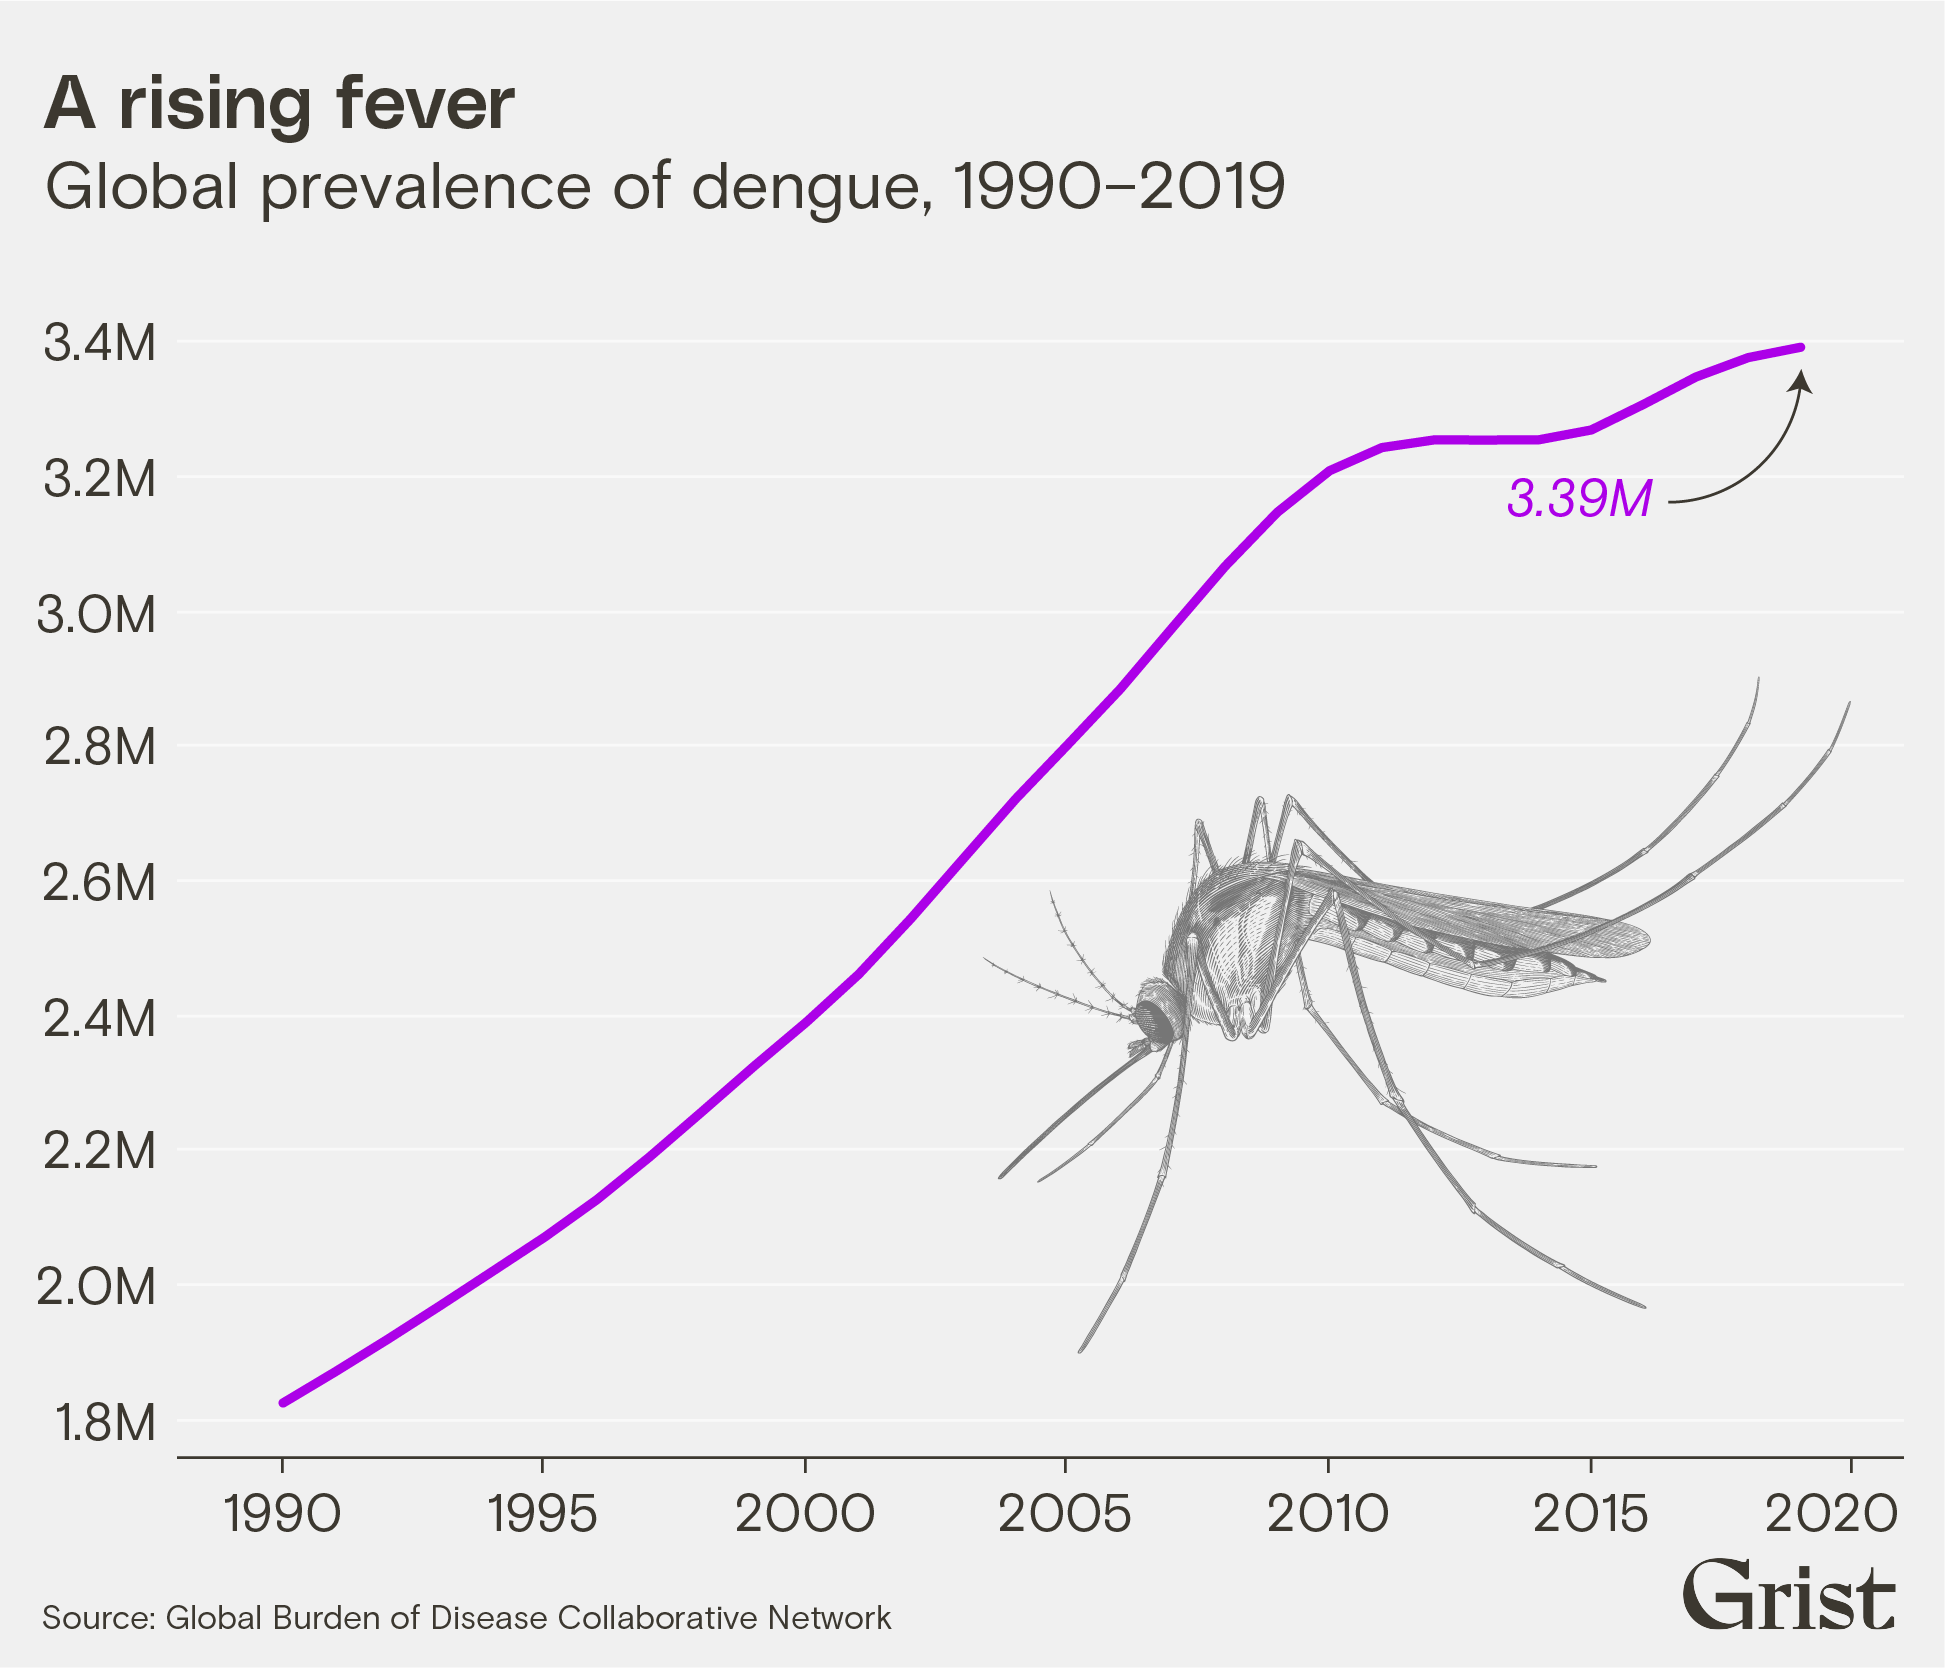 A line chart showing global dengue prevalence between 1990 and 2019. Cases rose from less than 2 million to 3.4 million over this time period.